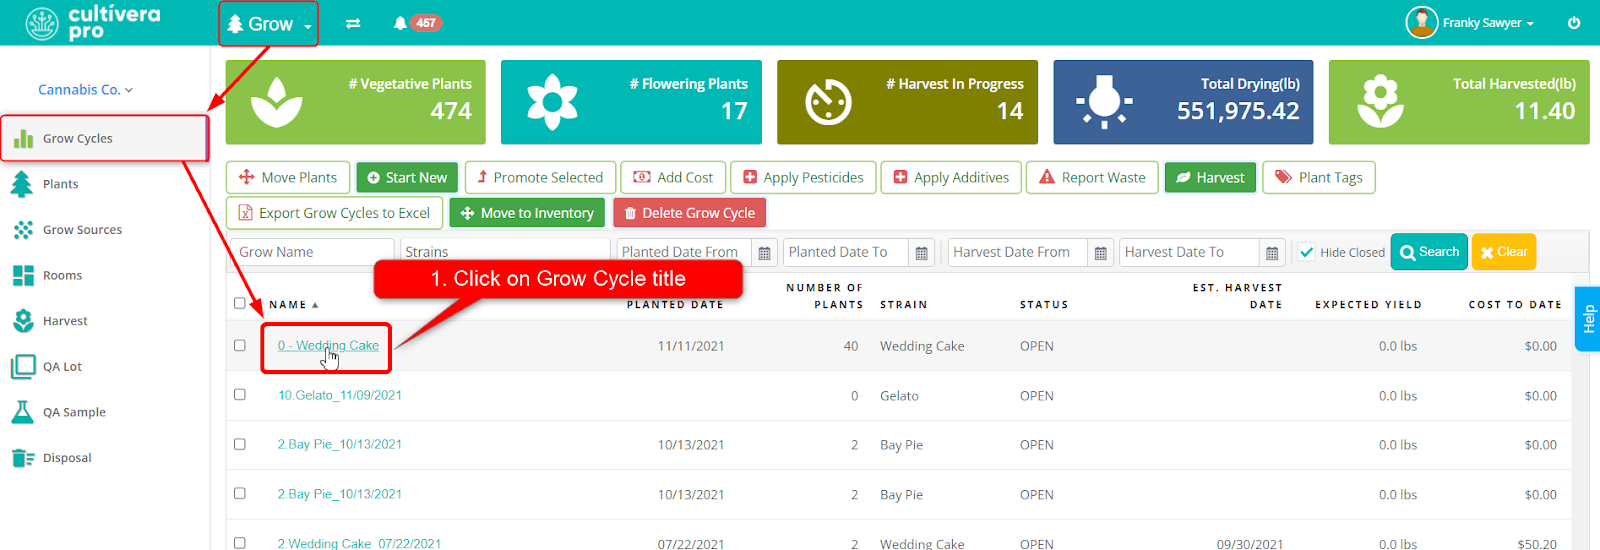 screenshot of cultivera pro grow cycle options